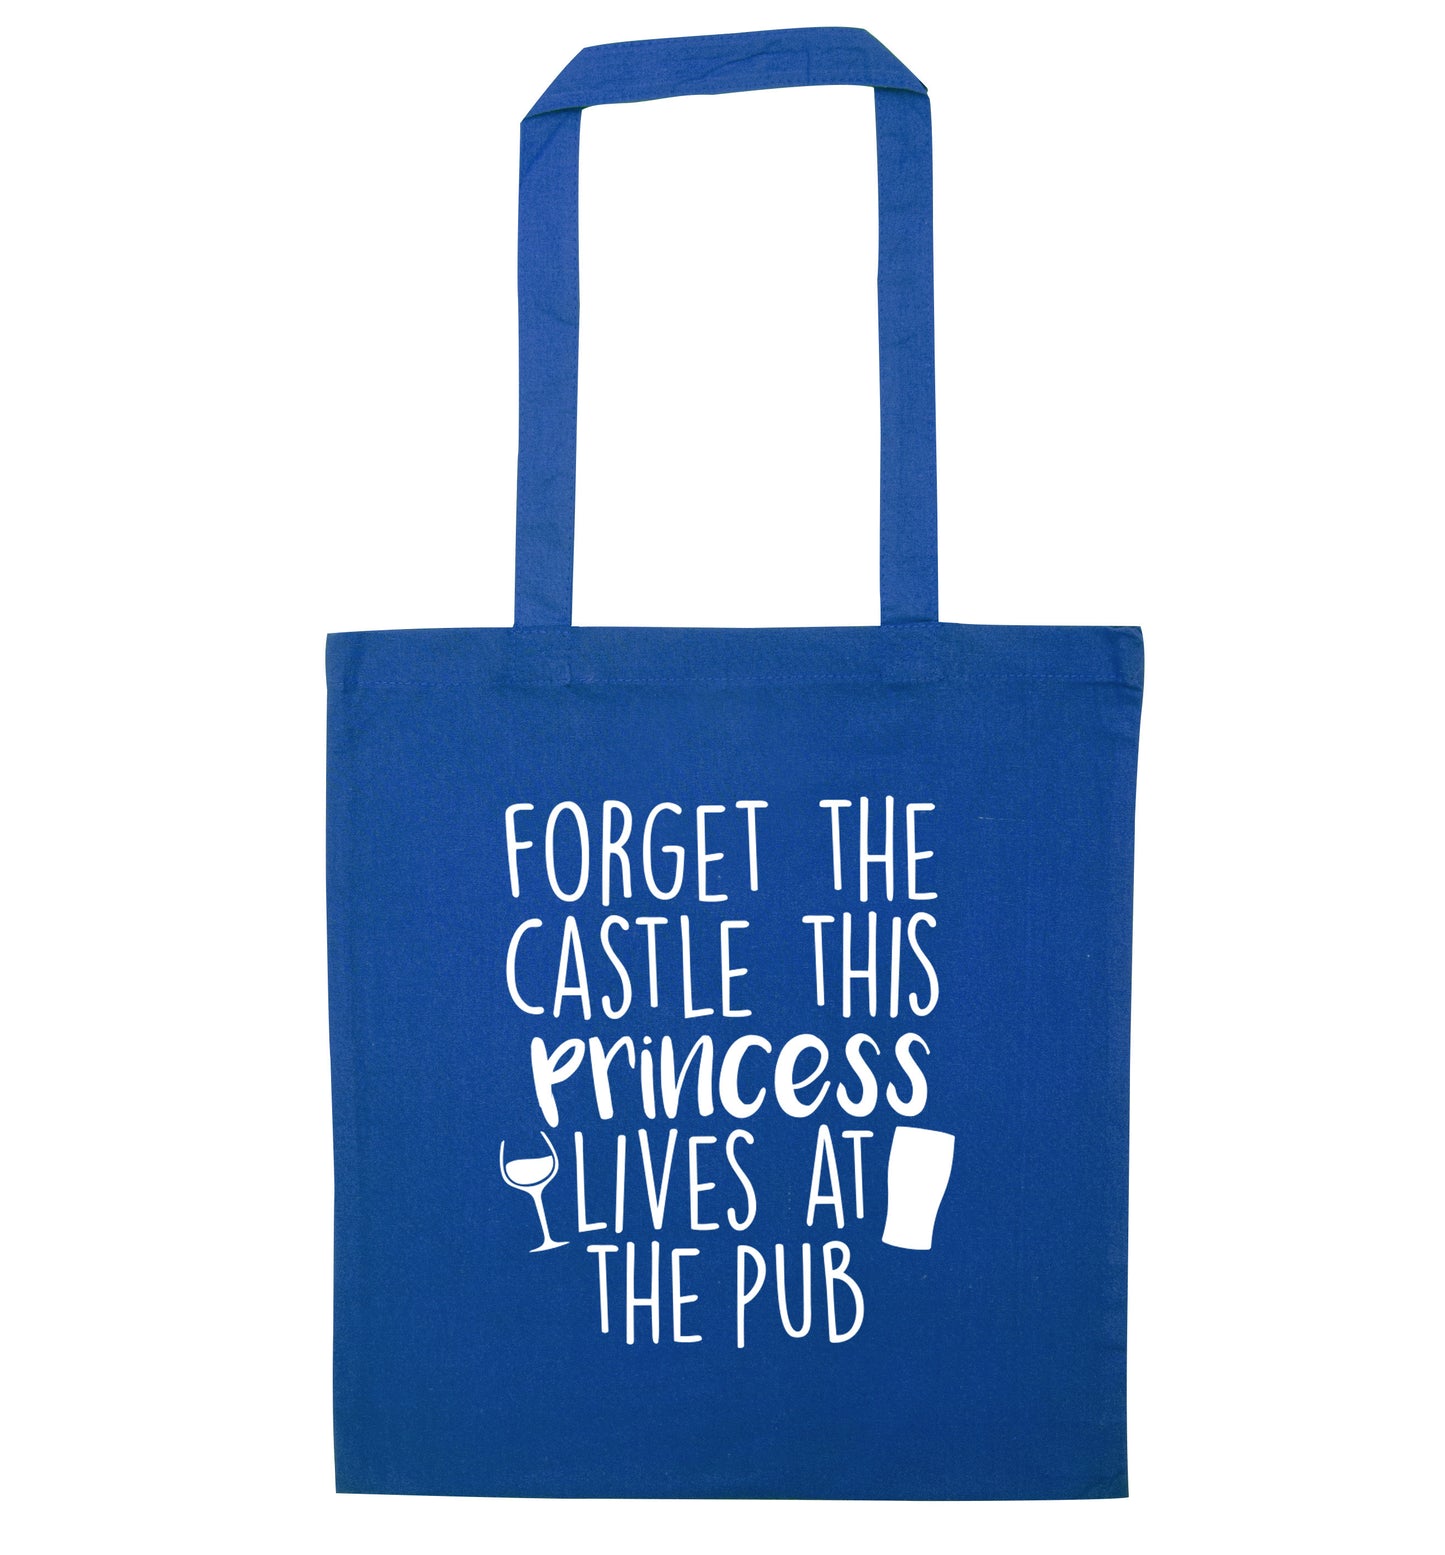 Forget the castle this princess lives at the pub blue tote bag